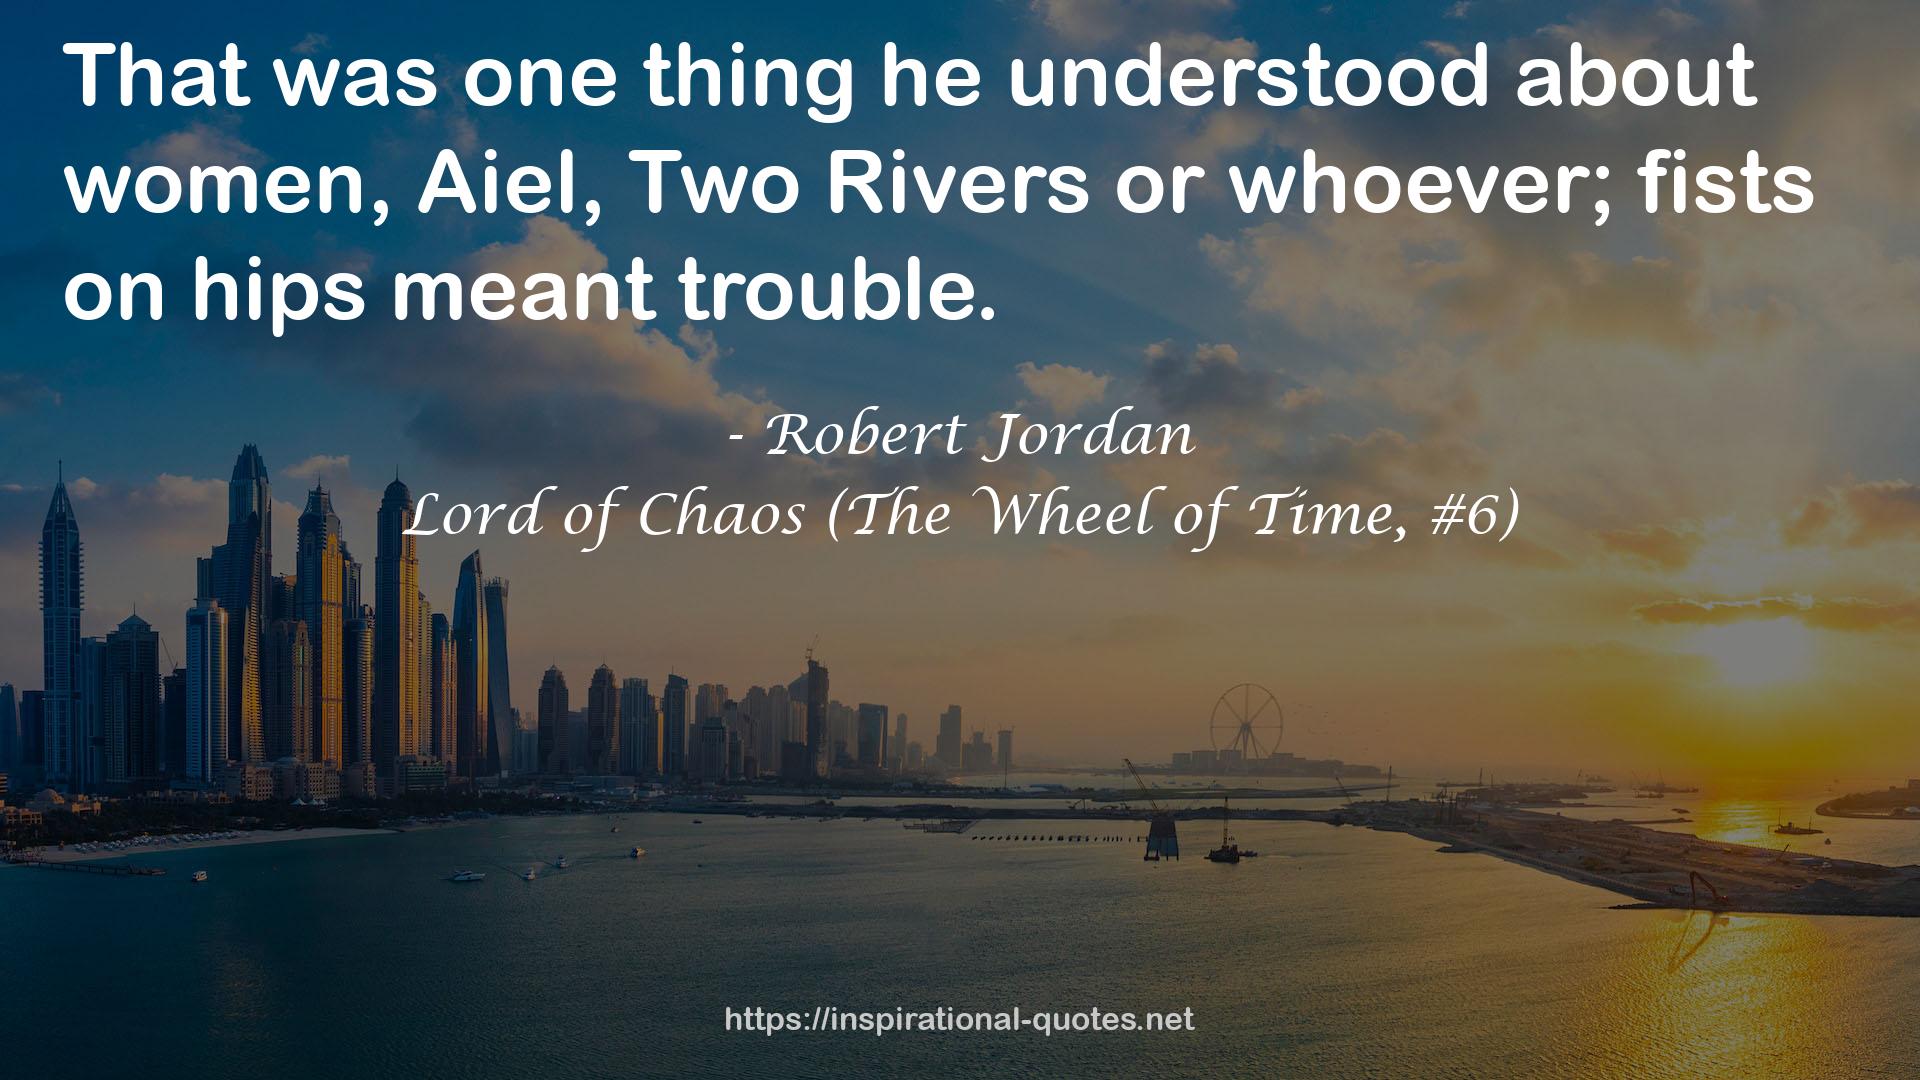 Lord of Chaos (The Wheel of Time, #6) QUOTES